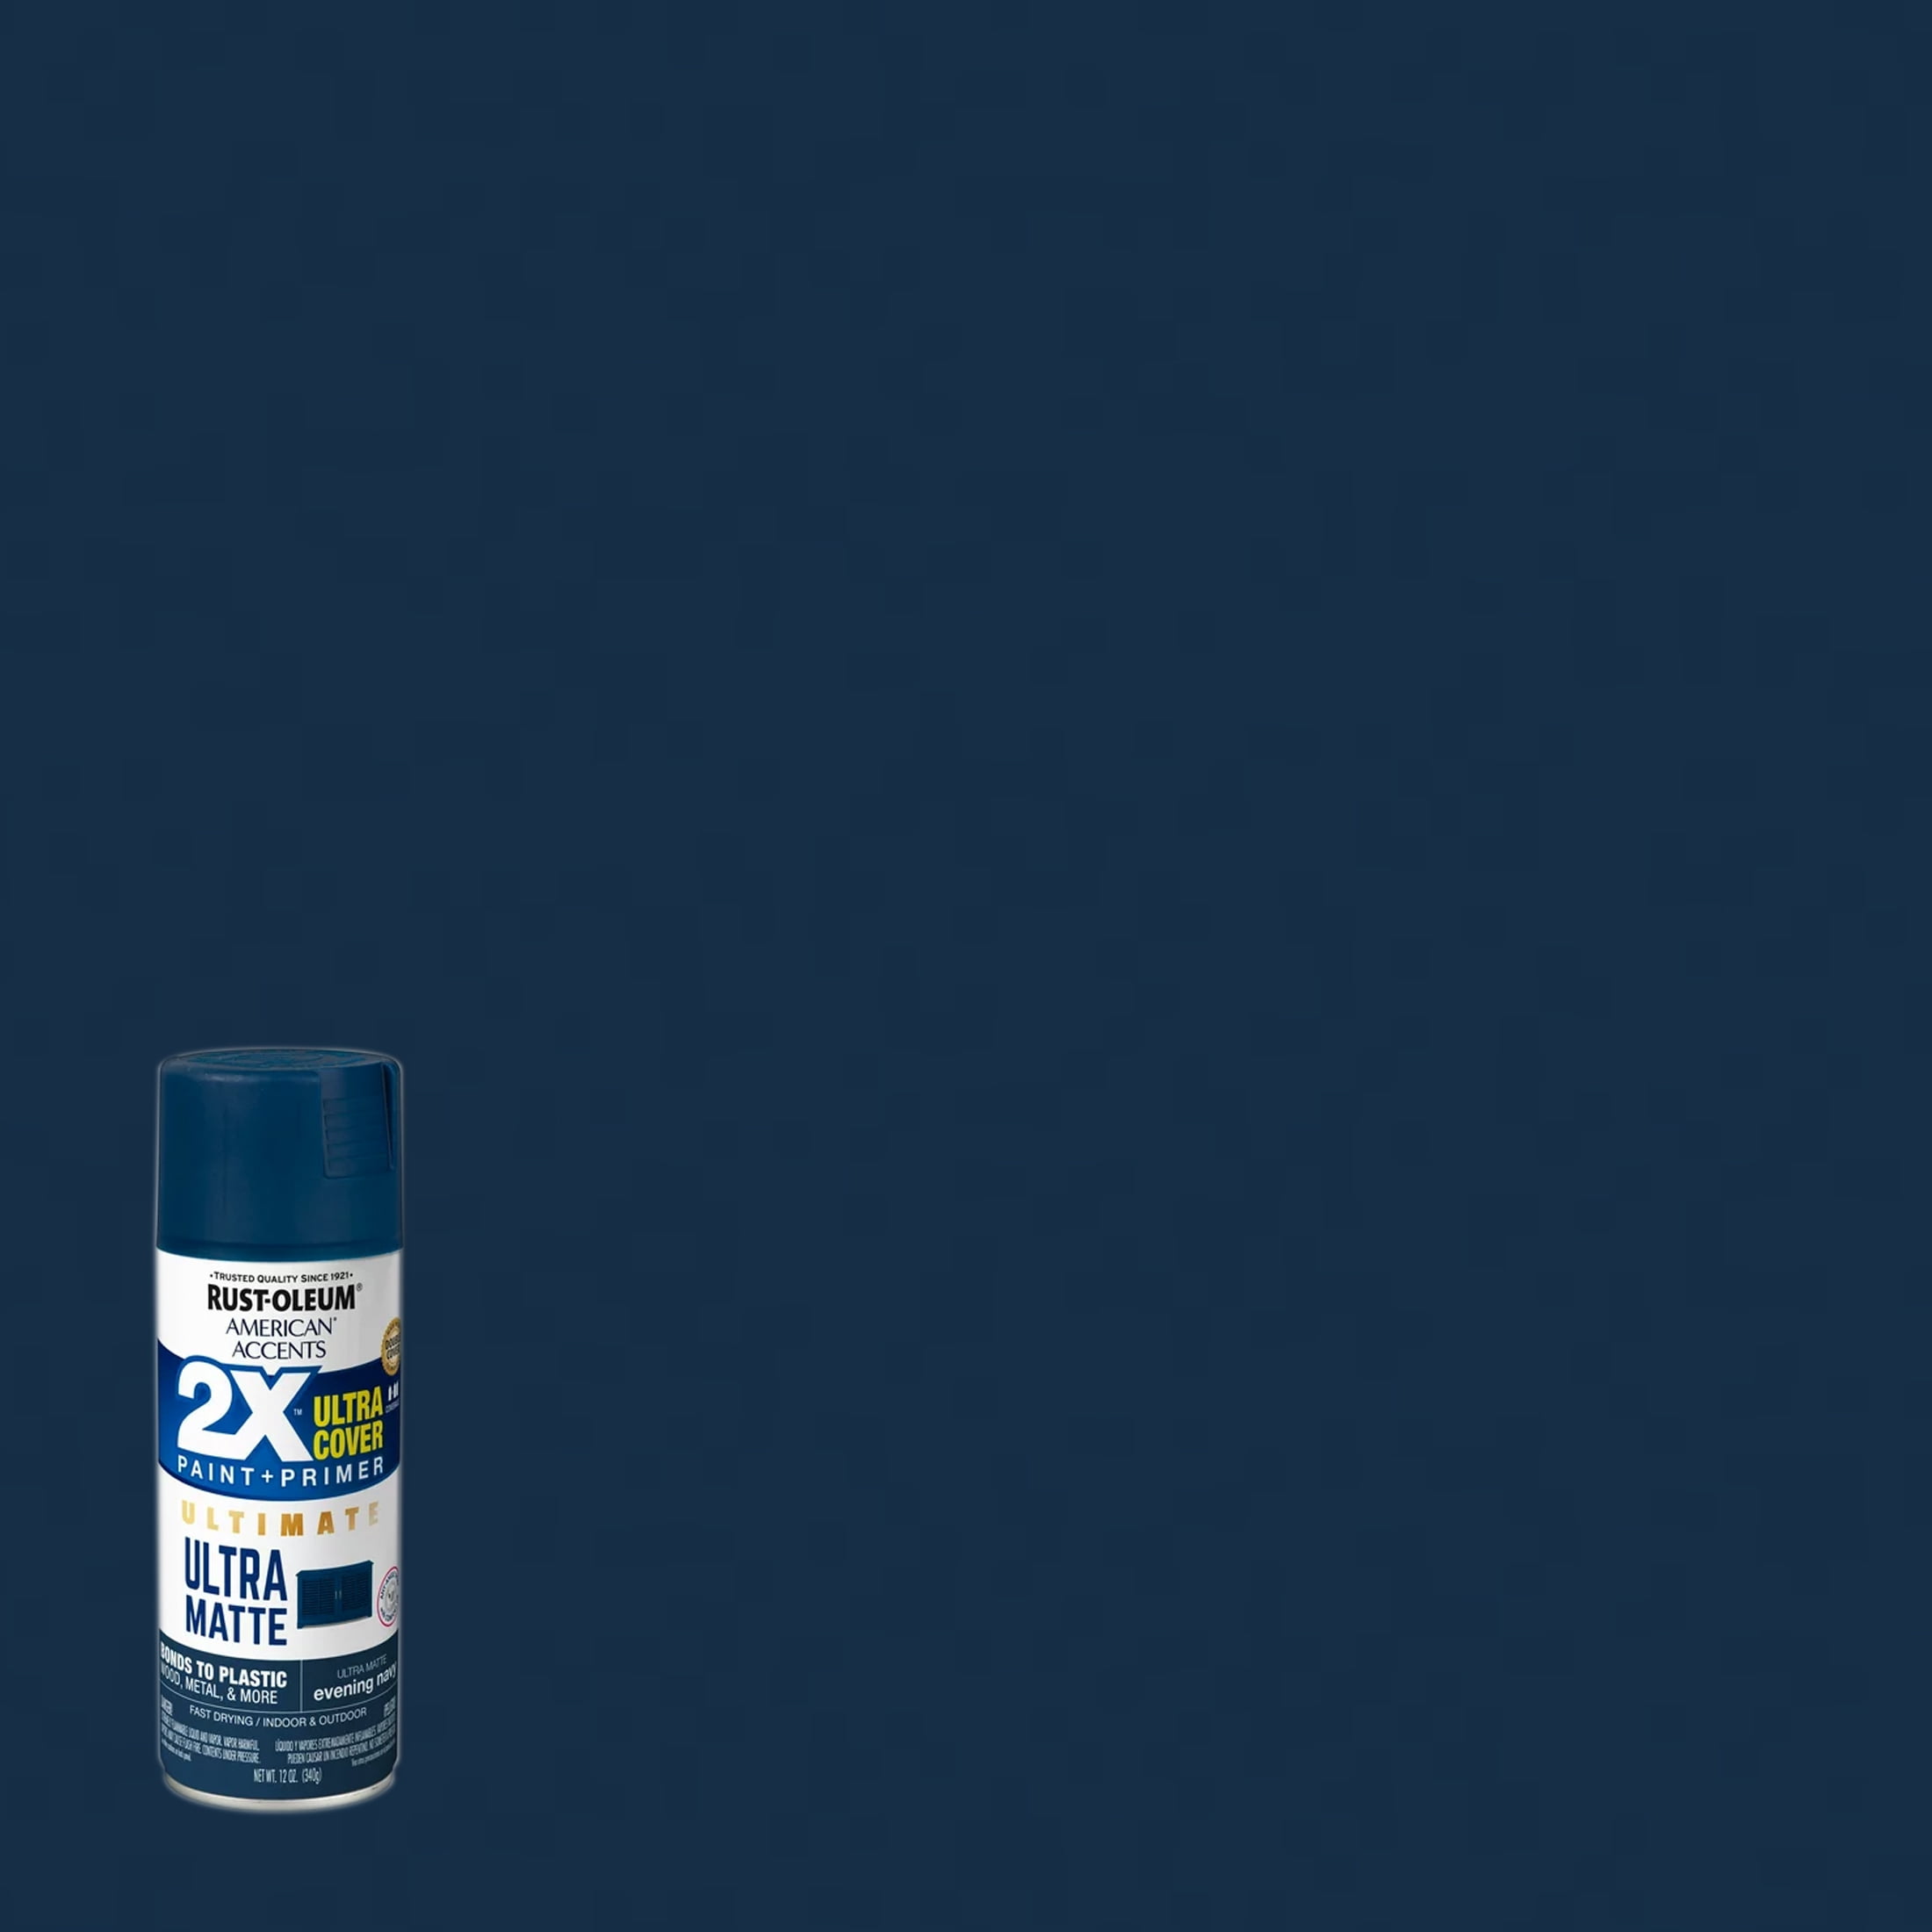 Evening Navy, Rust-Oleum American Accents 2X Ultra Cover Matte Spray ...